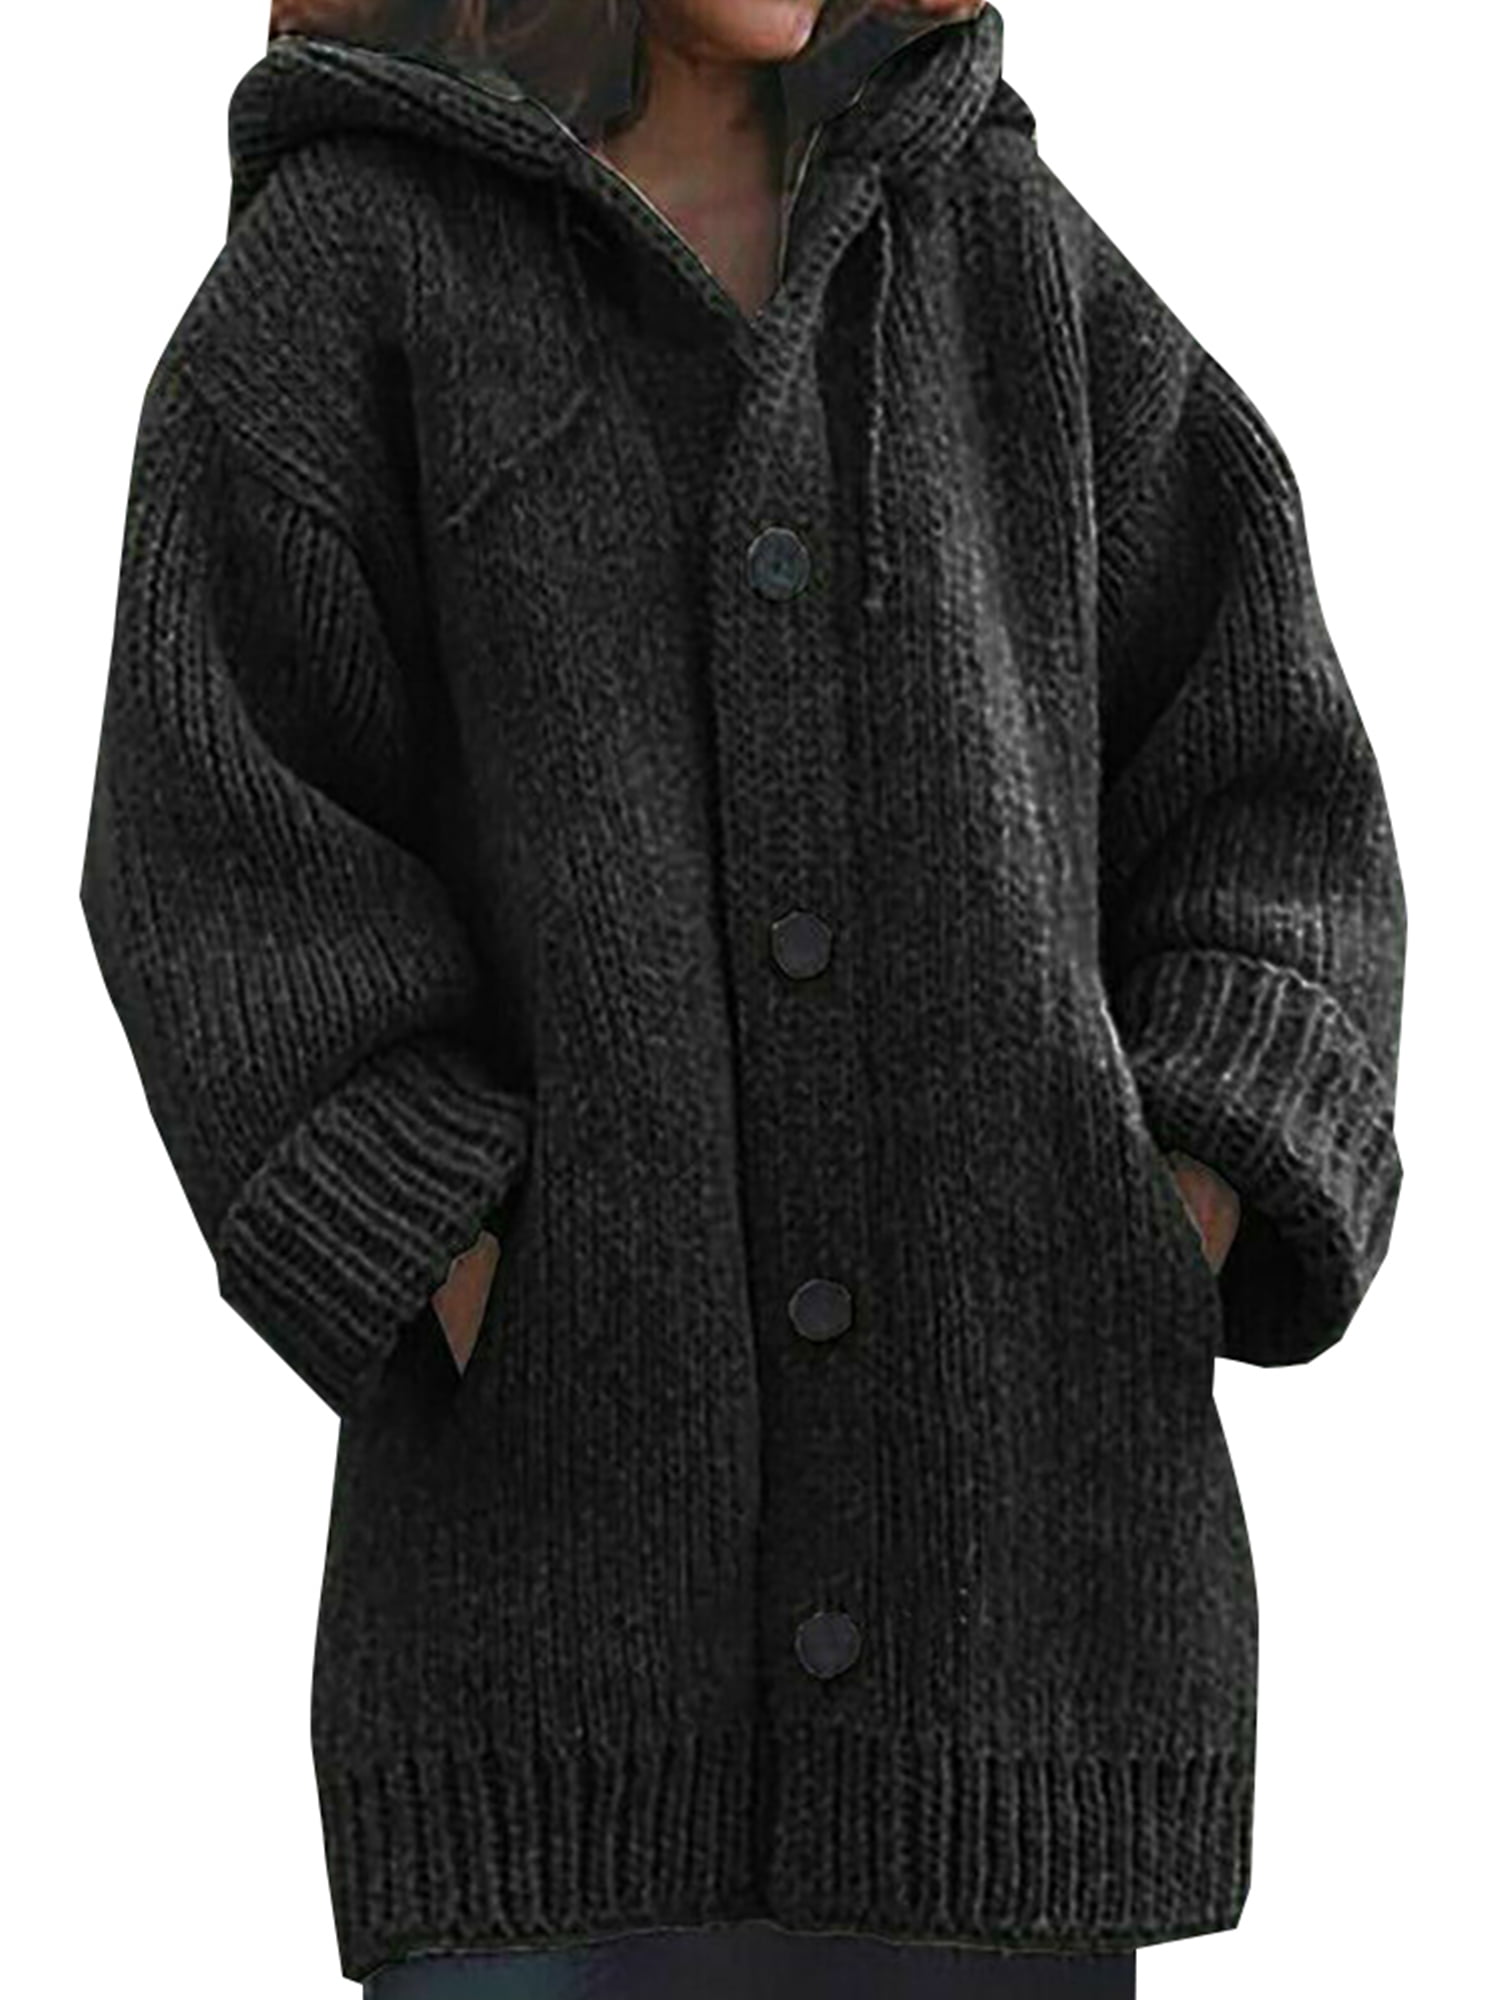 Women's Loose Casual Plus Size Knitted Hooded Winter Cardigan Coats